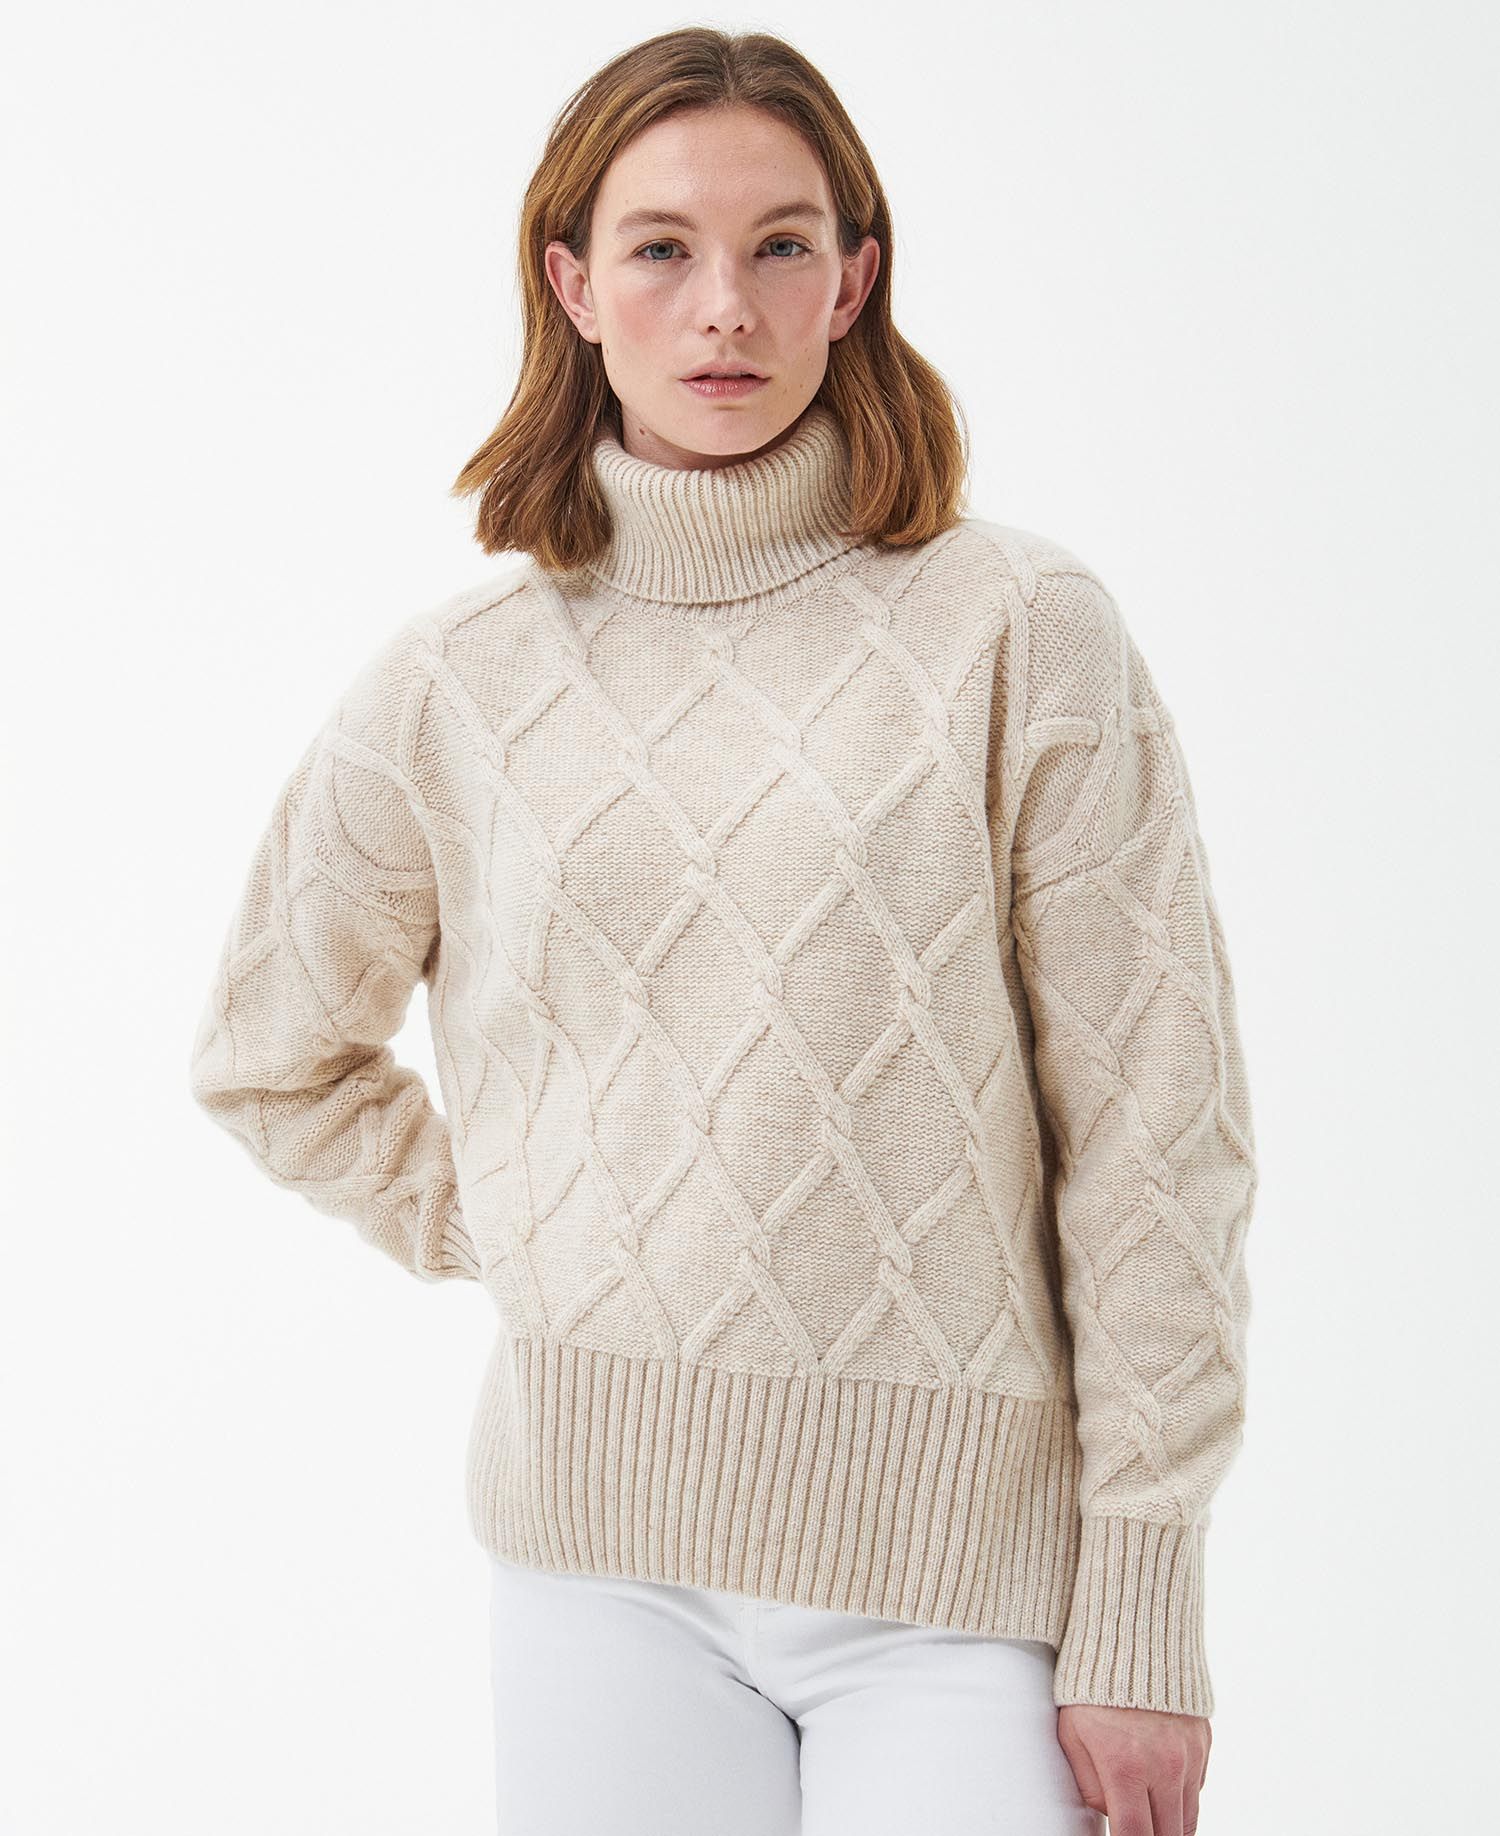 Barbour Ladies Perch Knit in Oatmeal